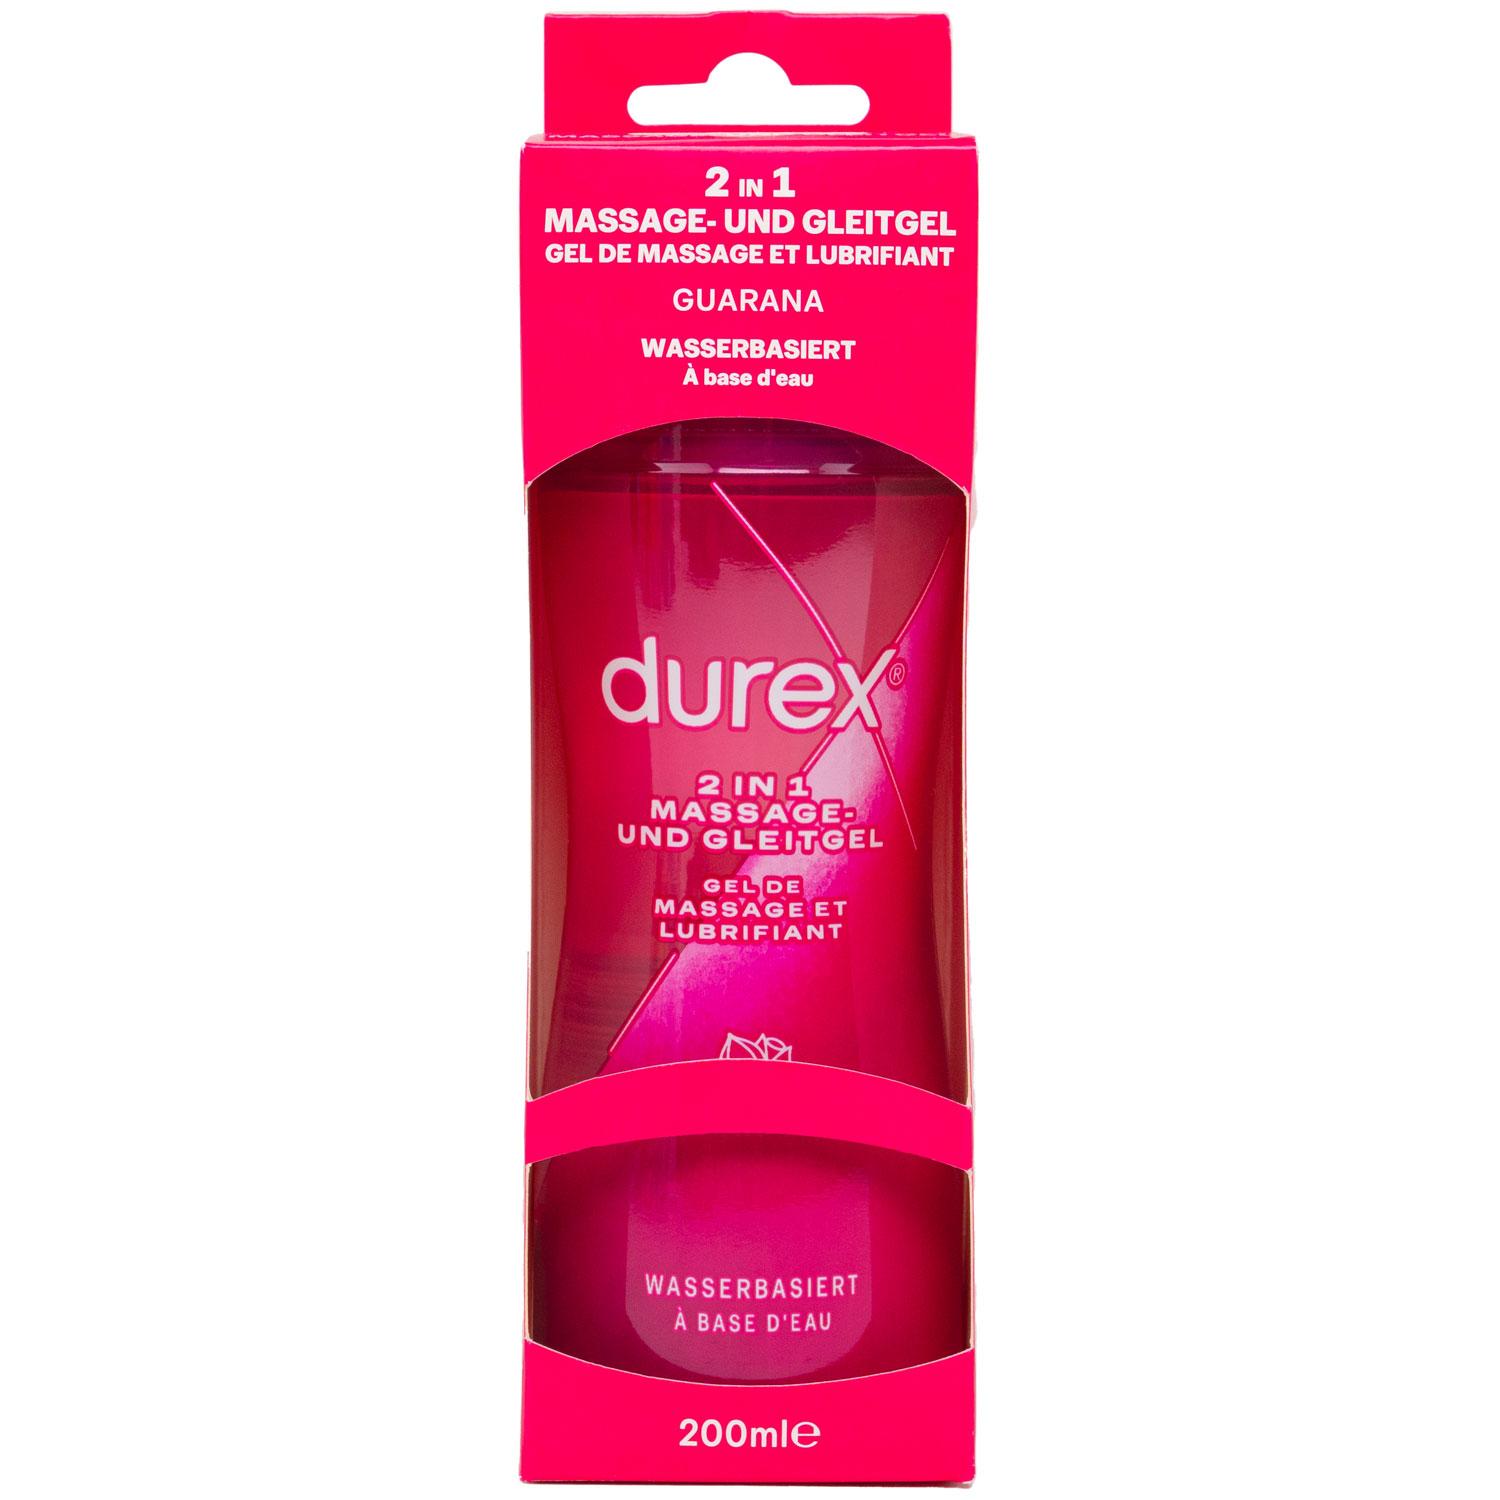 Durex Play 2 in 1, Massage & Lubricant with Guarana, Water Based, 200 ml